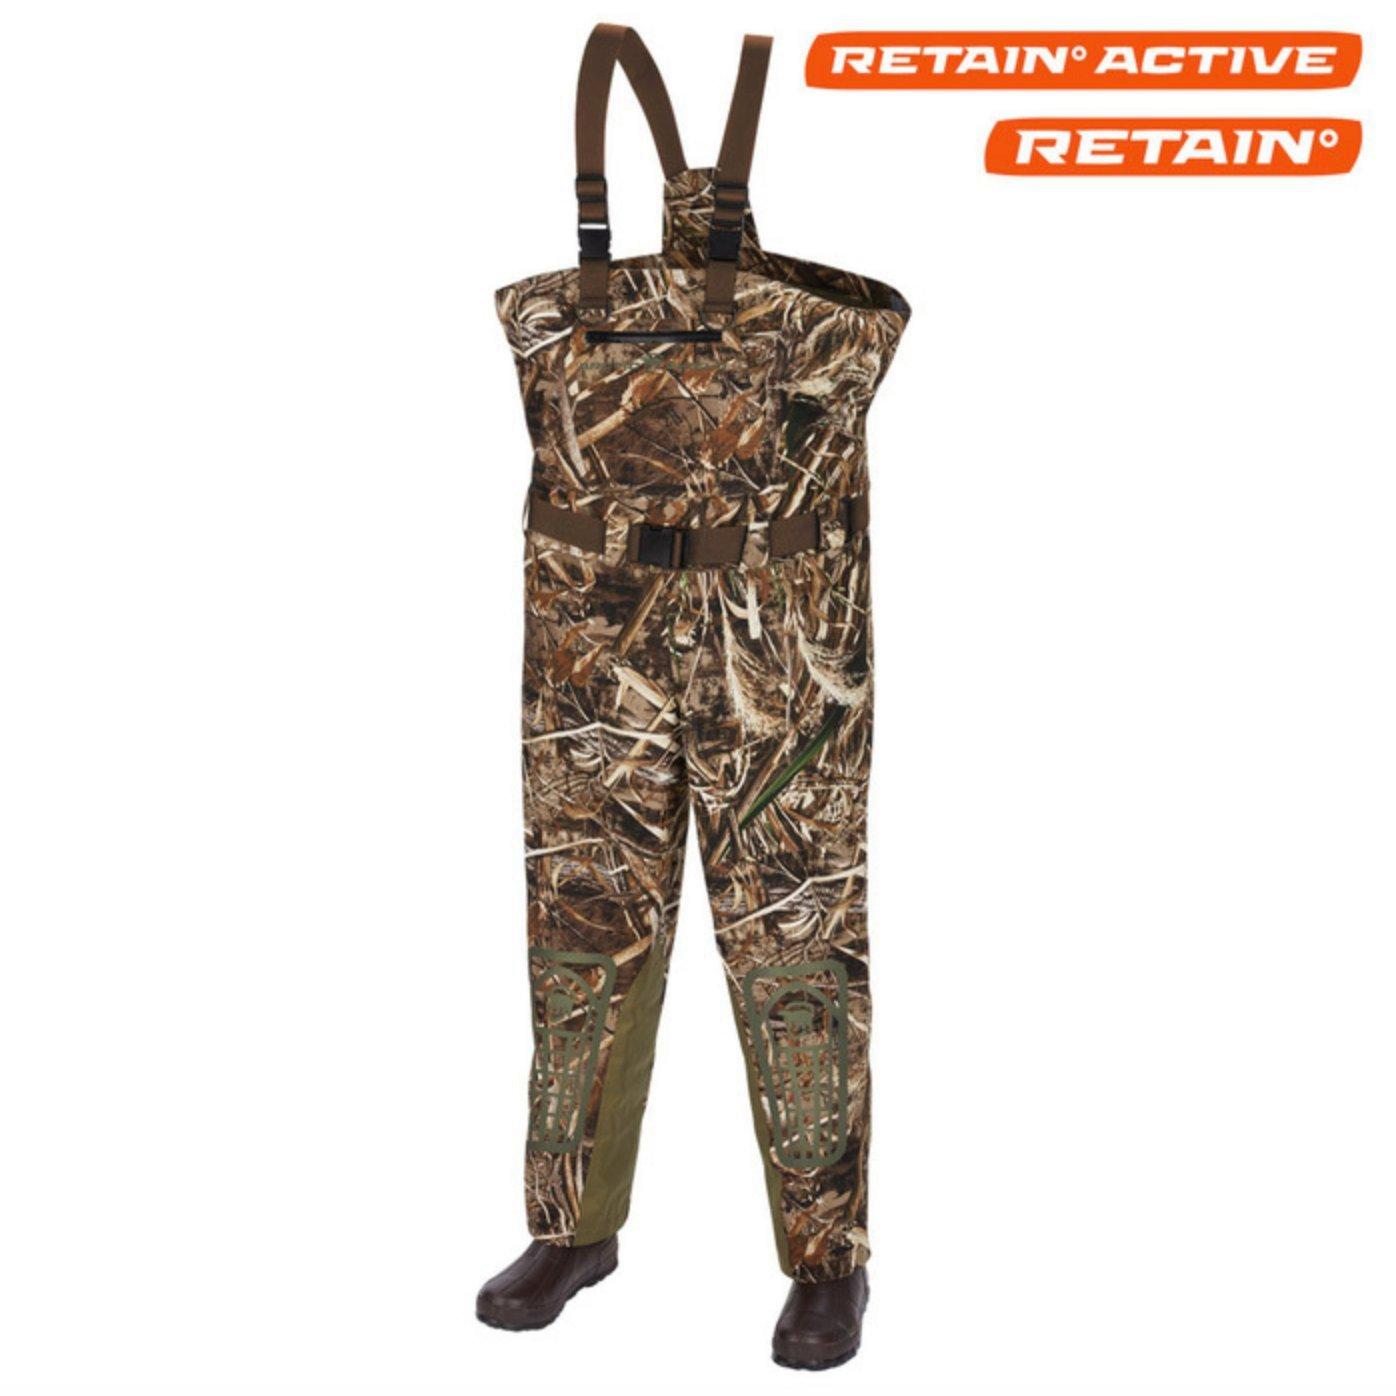 ArcticShield Heat Echo Select XT Breathable Chest Waders with Retain and Retain Active